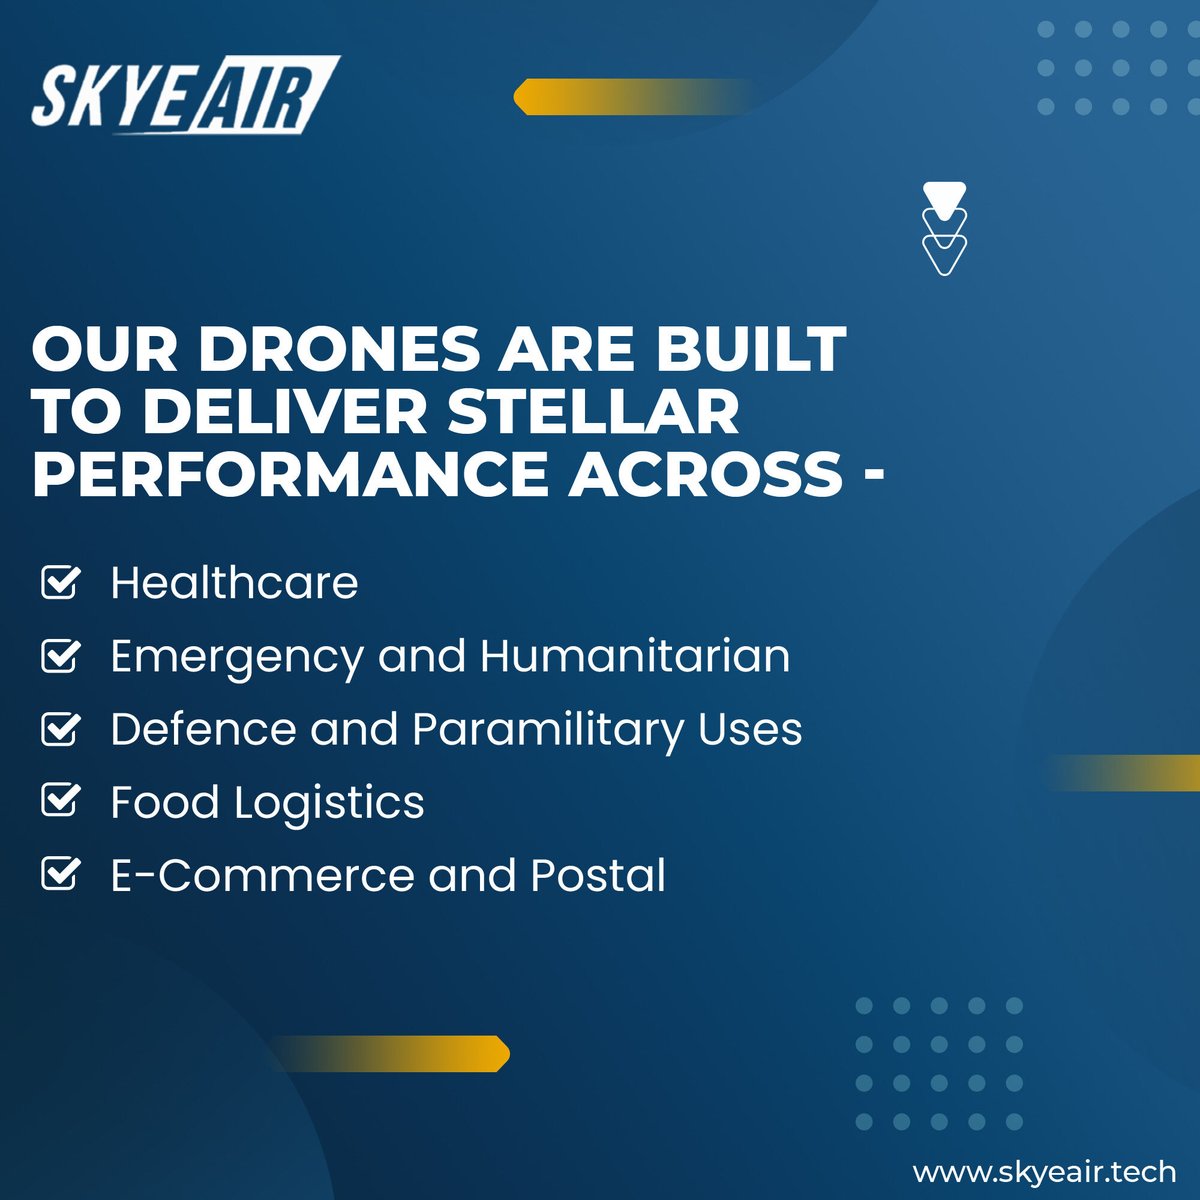 Skye Air Drones are built to completely transform the delivery ecosystem for the better and are designed to operate even during challenging meteorological conditions.

#SkyEAir #SkyEAirMobility #Drones #DronesDelivery #Aerospace #Aviation #UAV #Technology #Drone #DroneRevolution